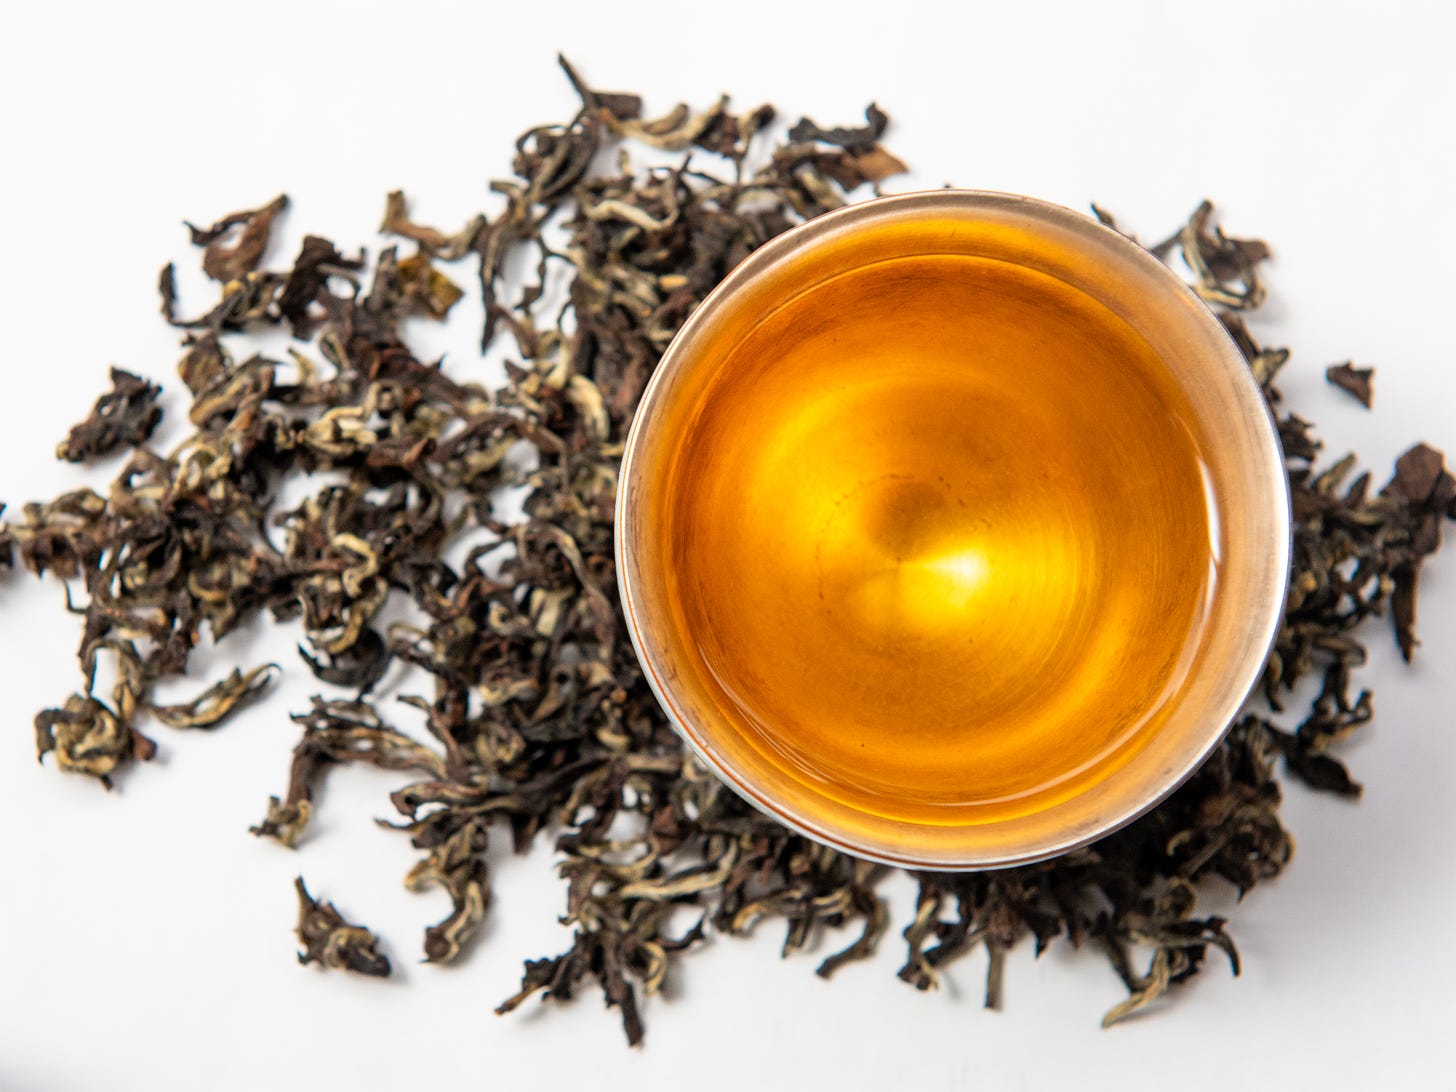 ID: Champagne oolong brewed tea in a silver cup, against dry leaf